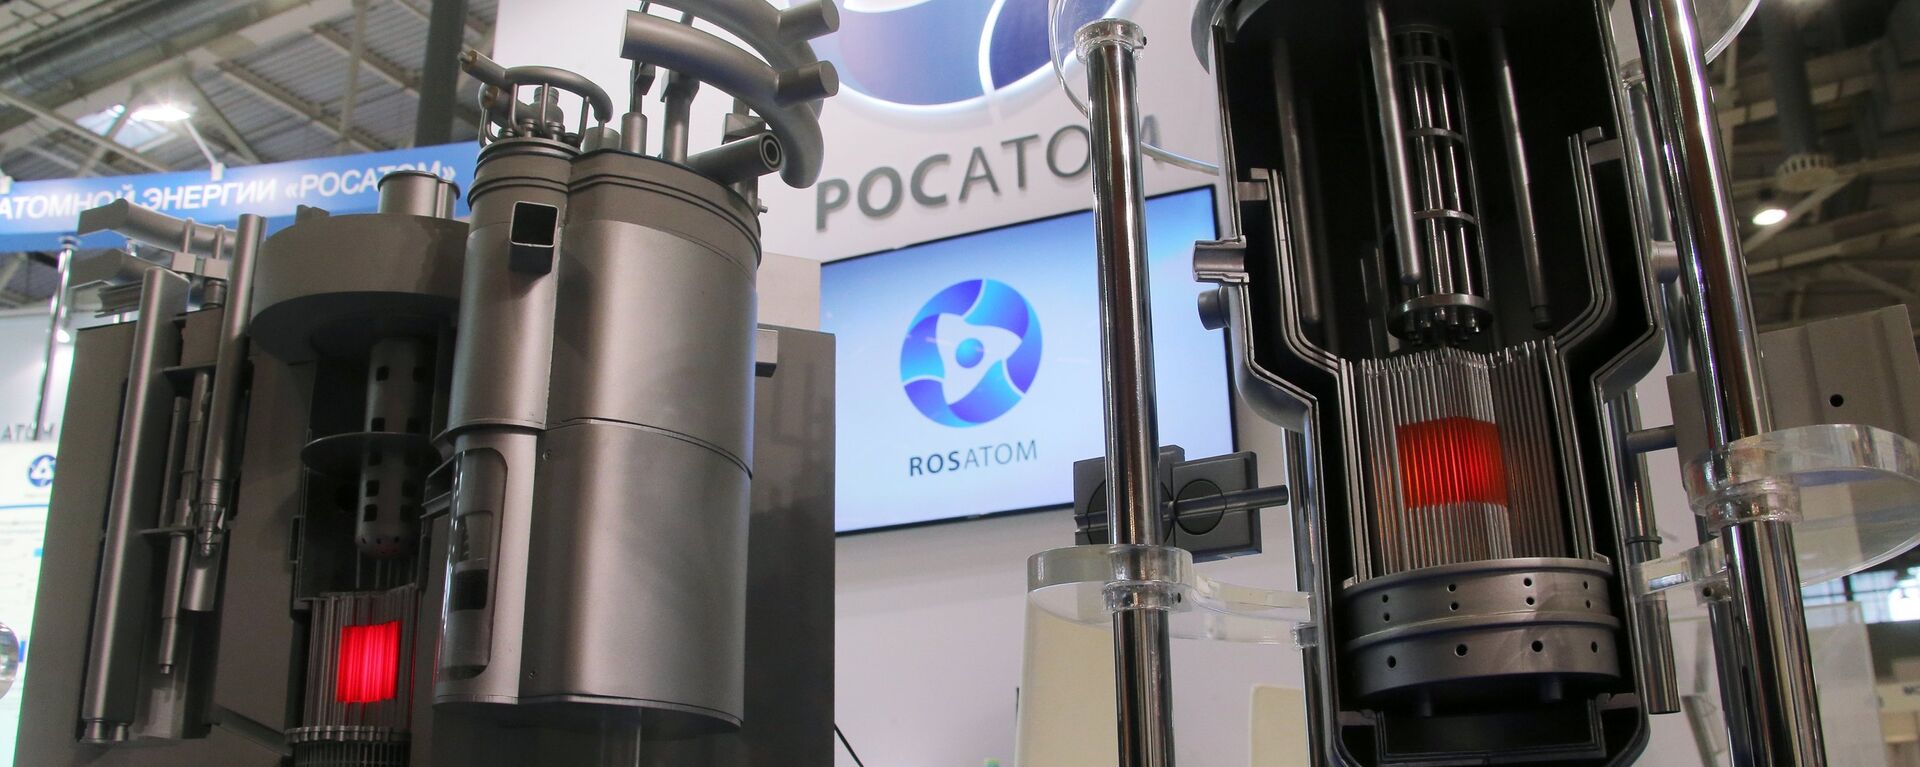 Models of nuclear reactors BREST and MBIR at Rosatom's stand at the 11th National Forum and Exhibition Goszakaz - 2015  - Sputnik International, 1920, 18.04.2023